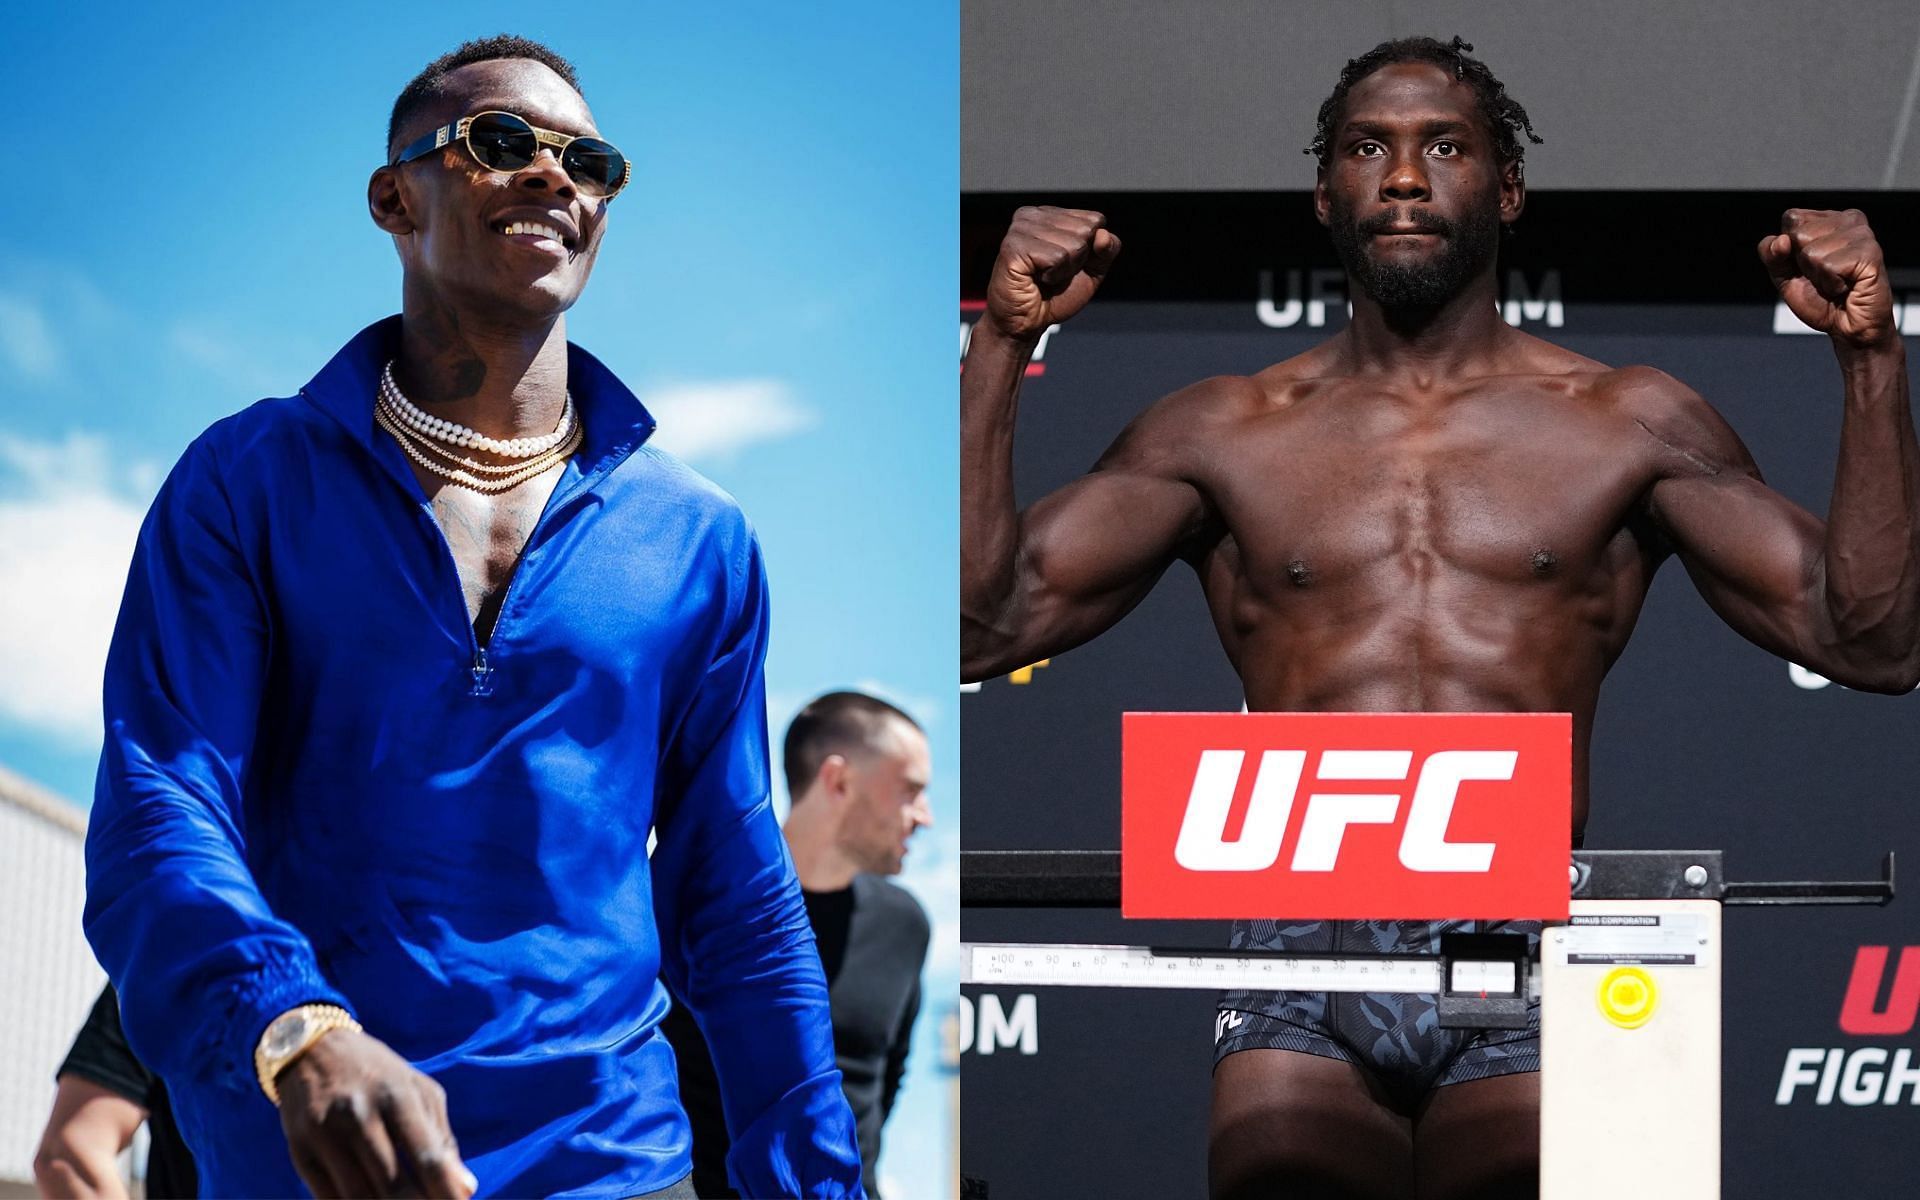 Israel Adesanya (L) and Jared Cannonier (R) [image courtesy of @stylebender Instagram and Getty]